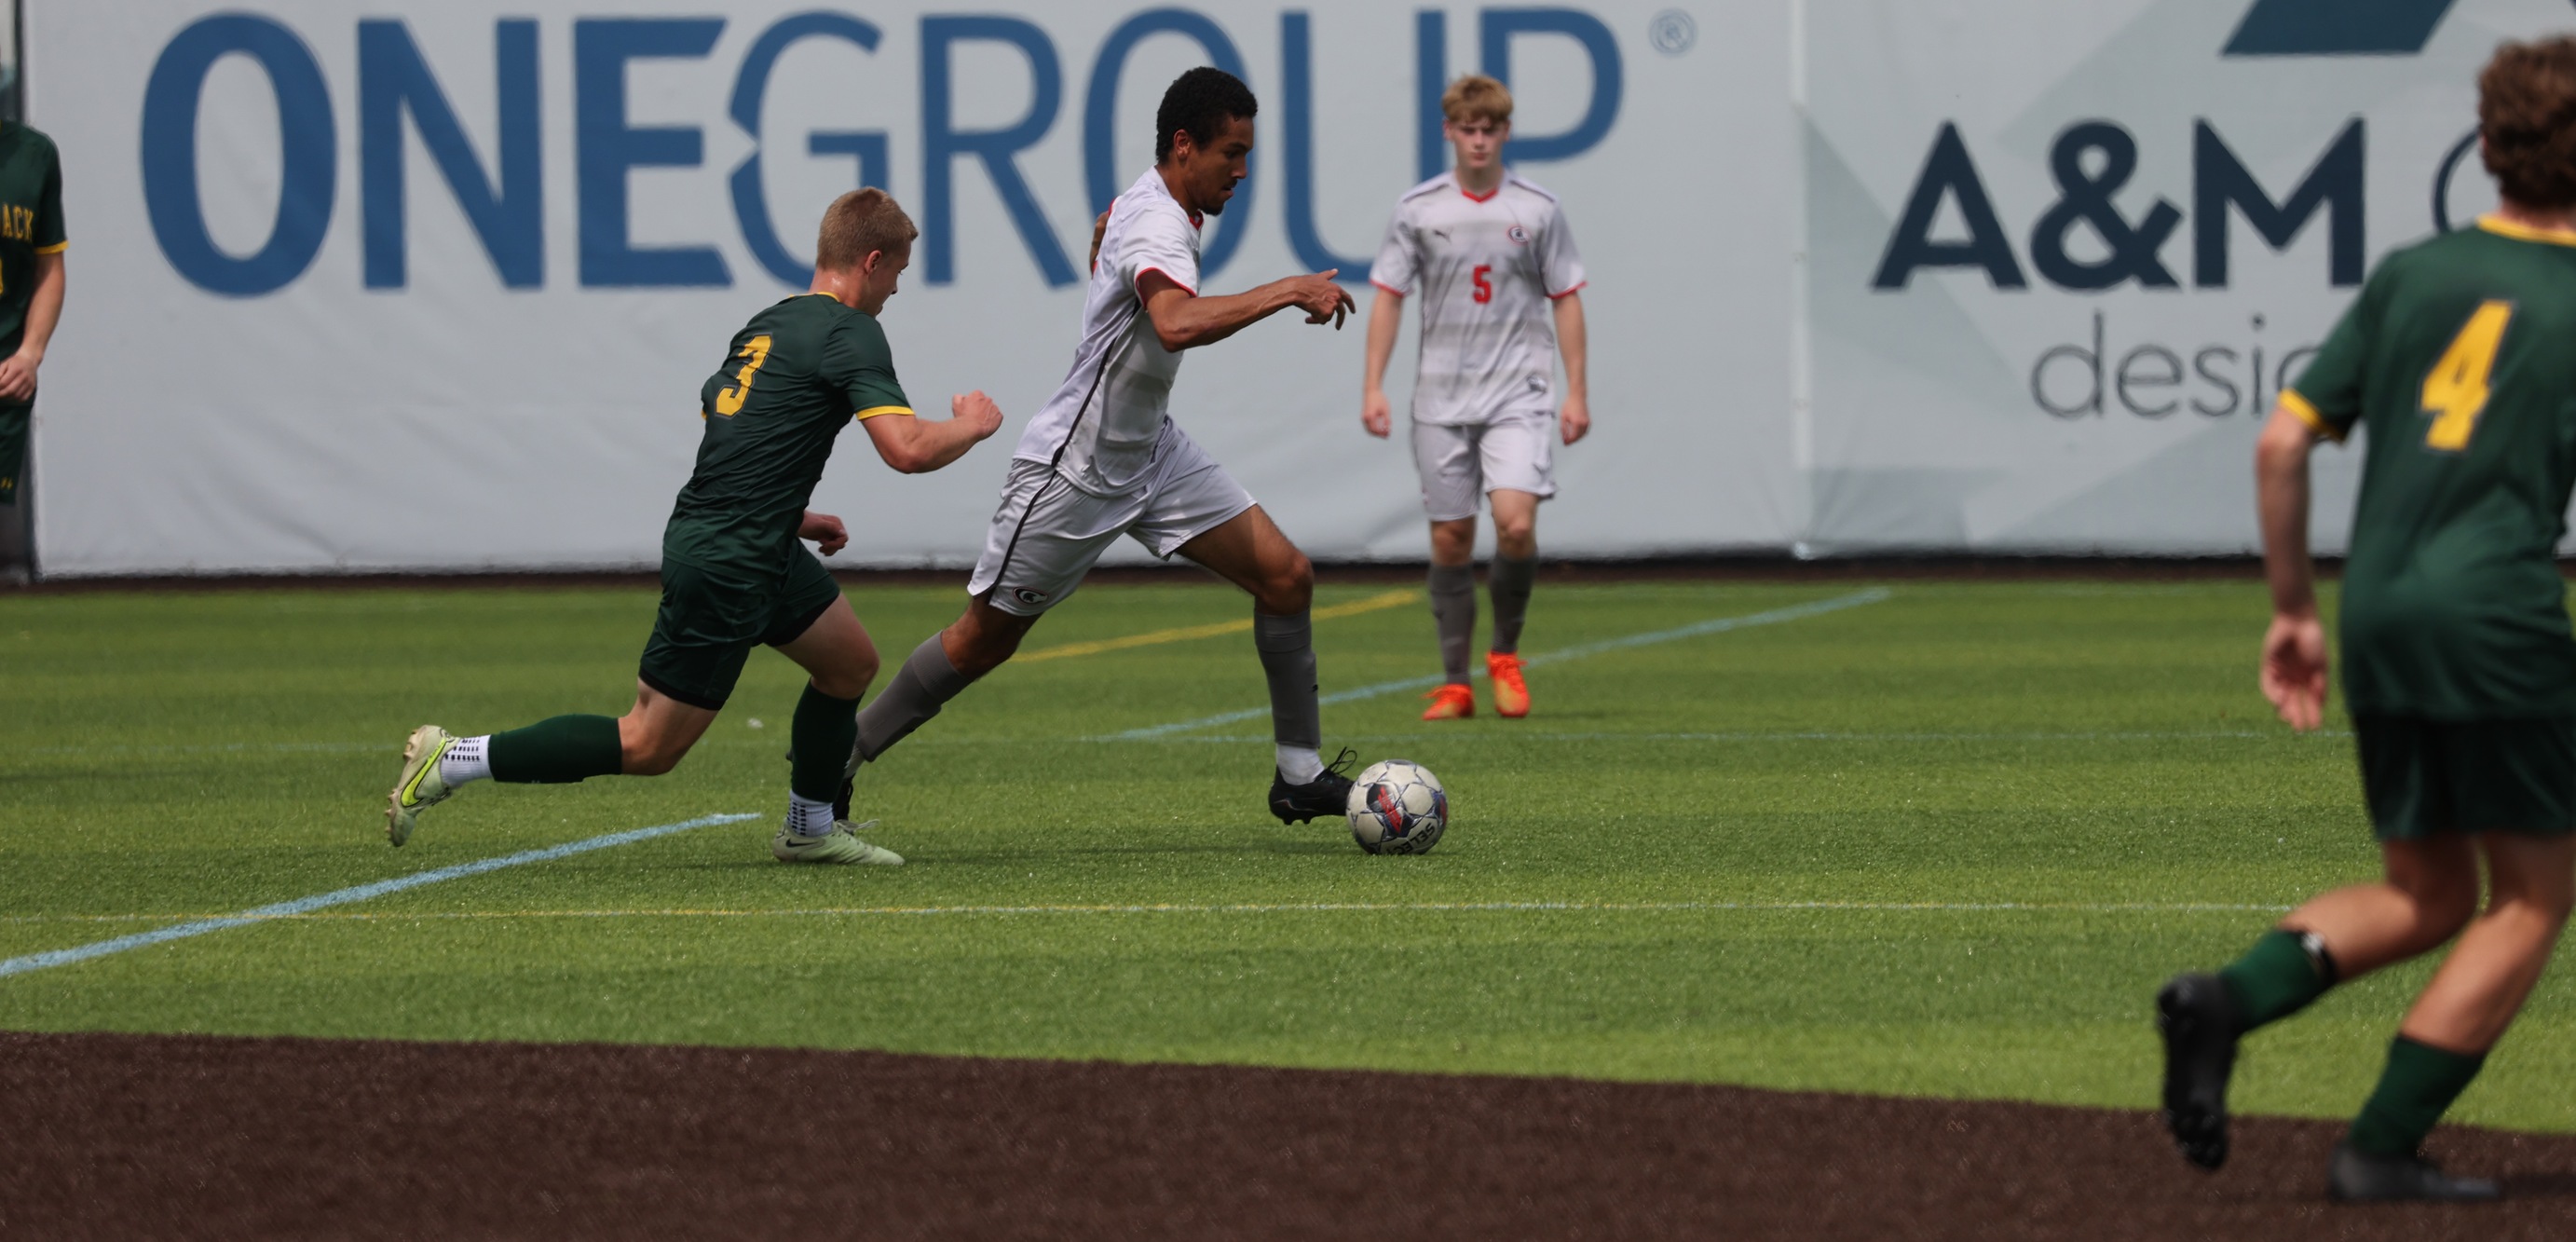 Chris Tielrooij scored a goal in Cayuga's 3-2 win over Jefferson CC on Friday.